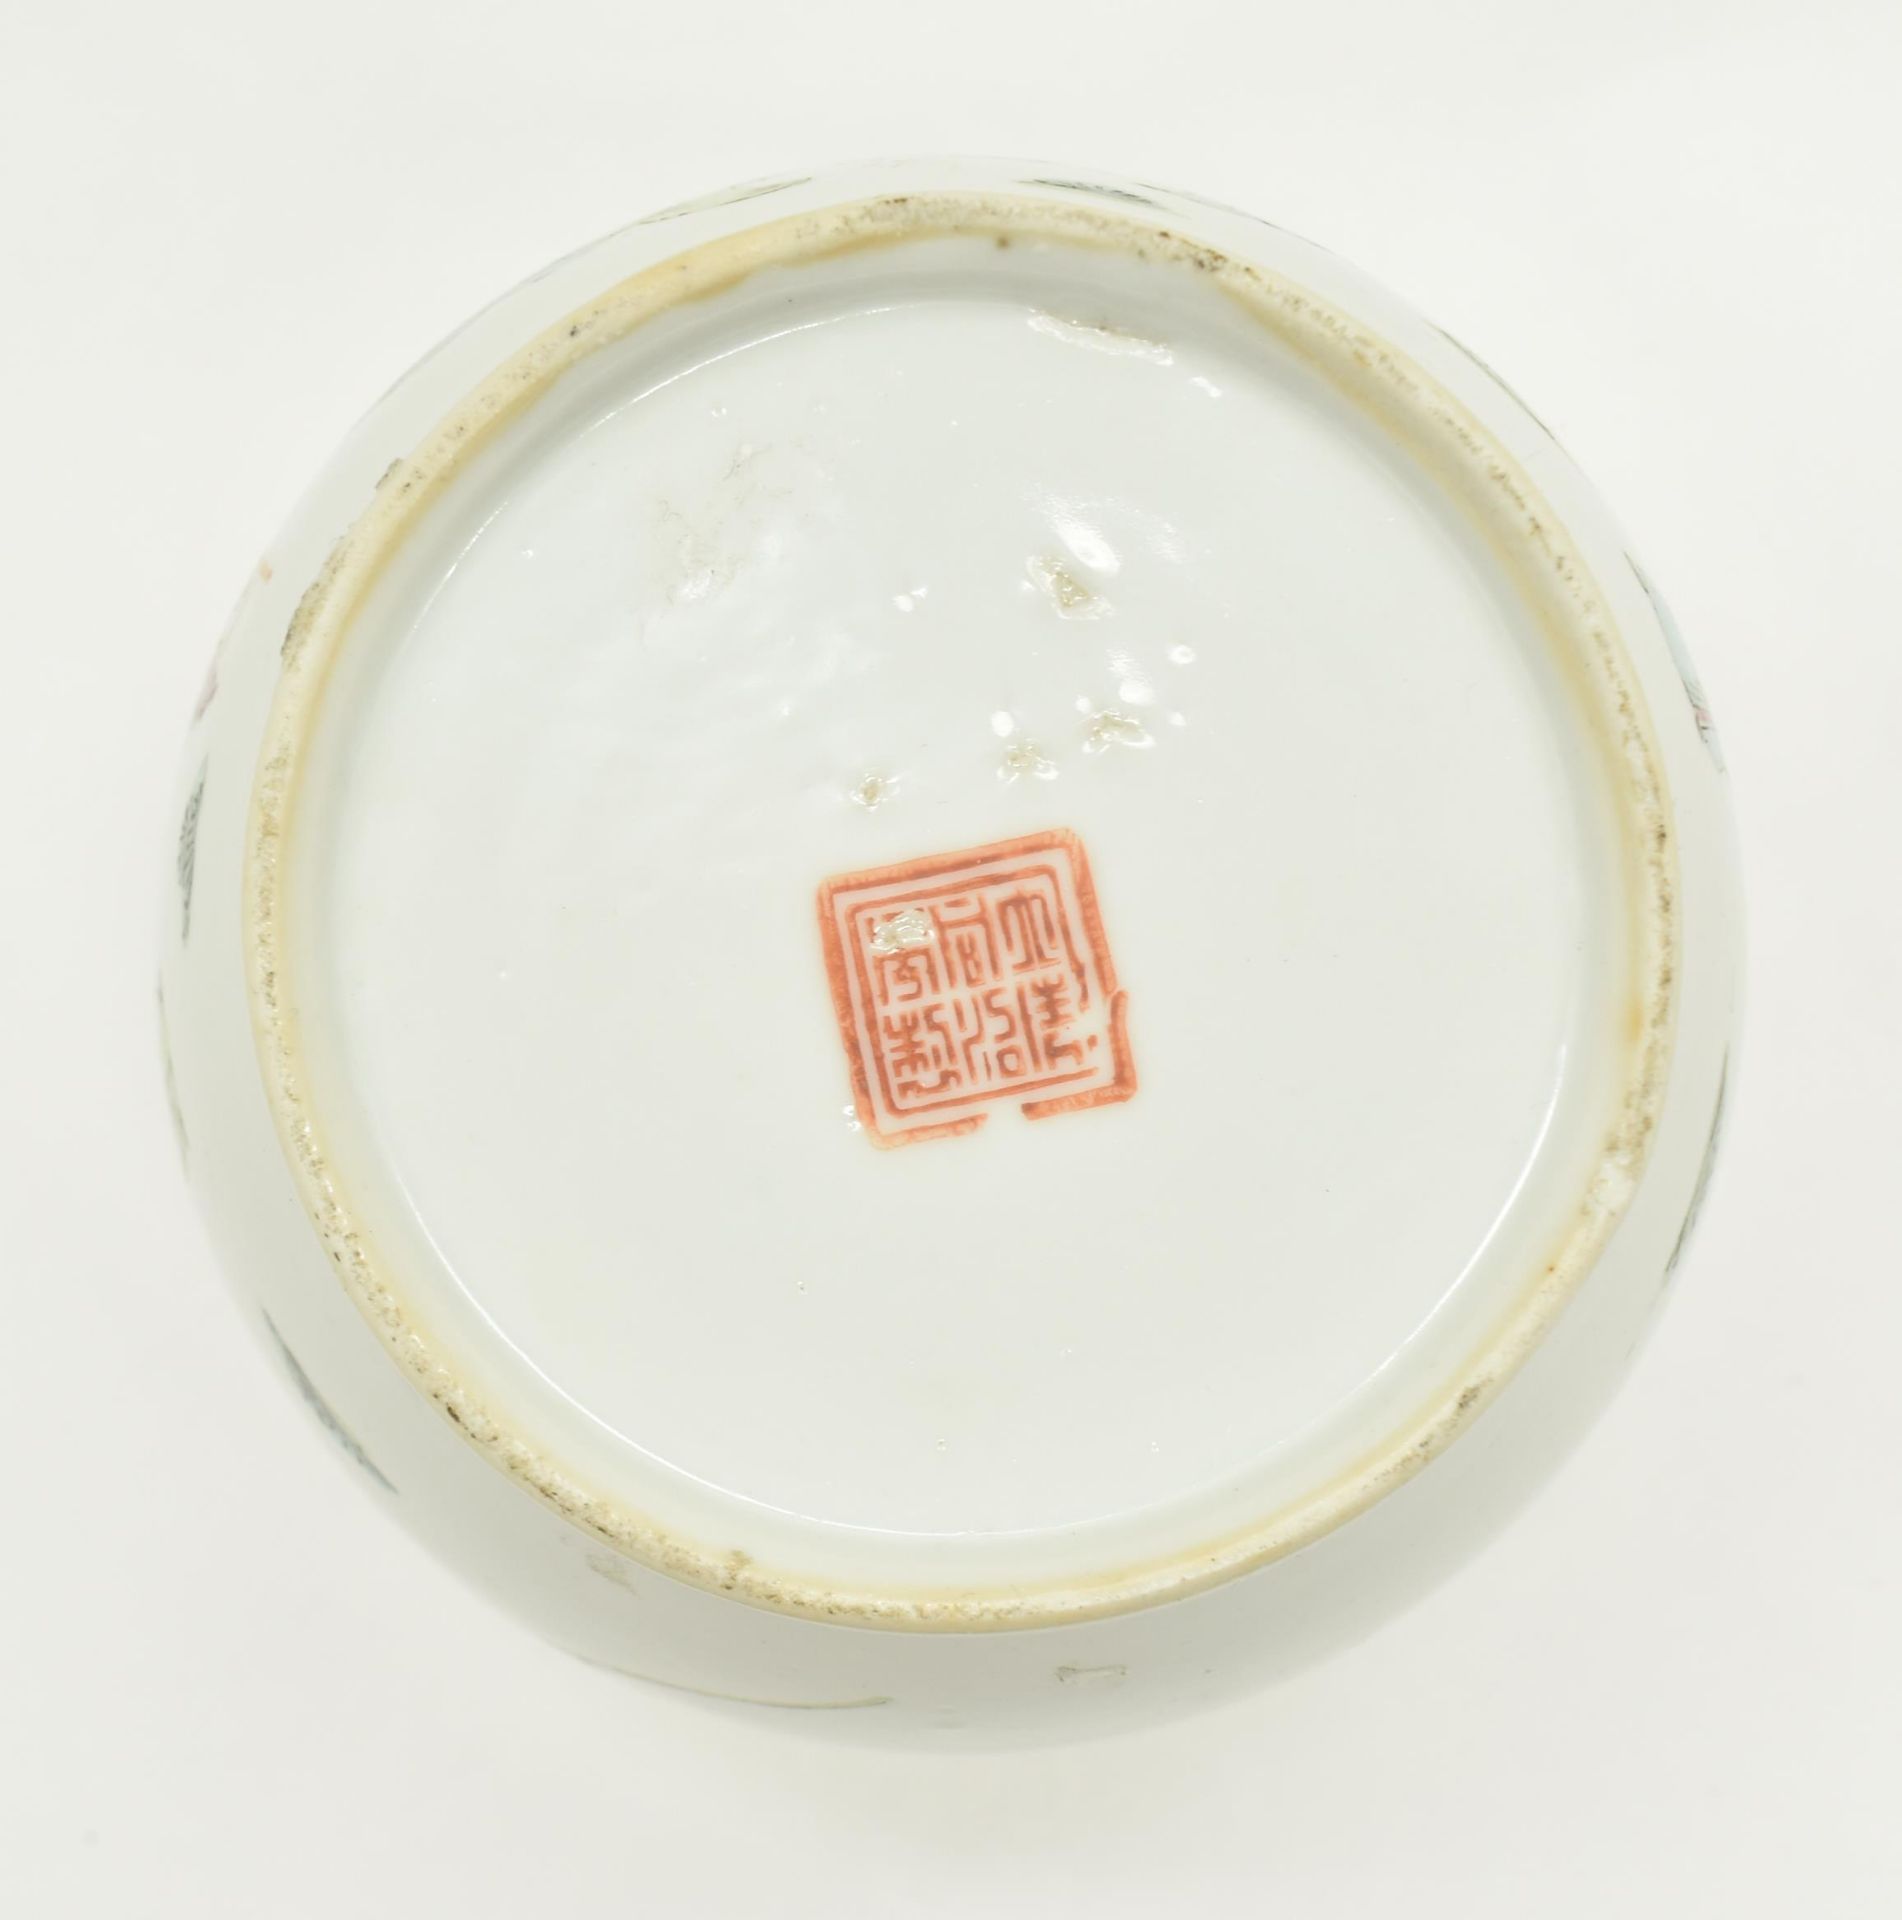 QING TONGZHI FAMILLE ROSE JAR WITH LID 清 同治粉彩盖罐 - Image 7 of 10